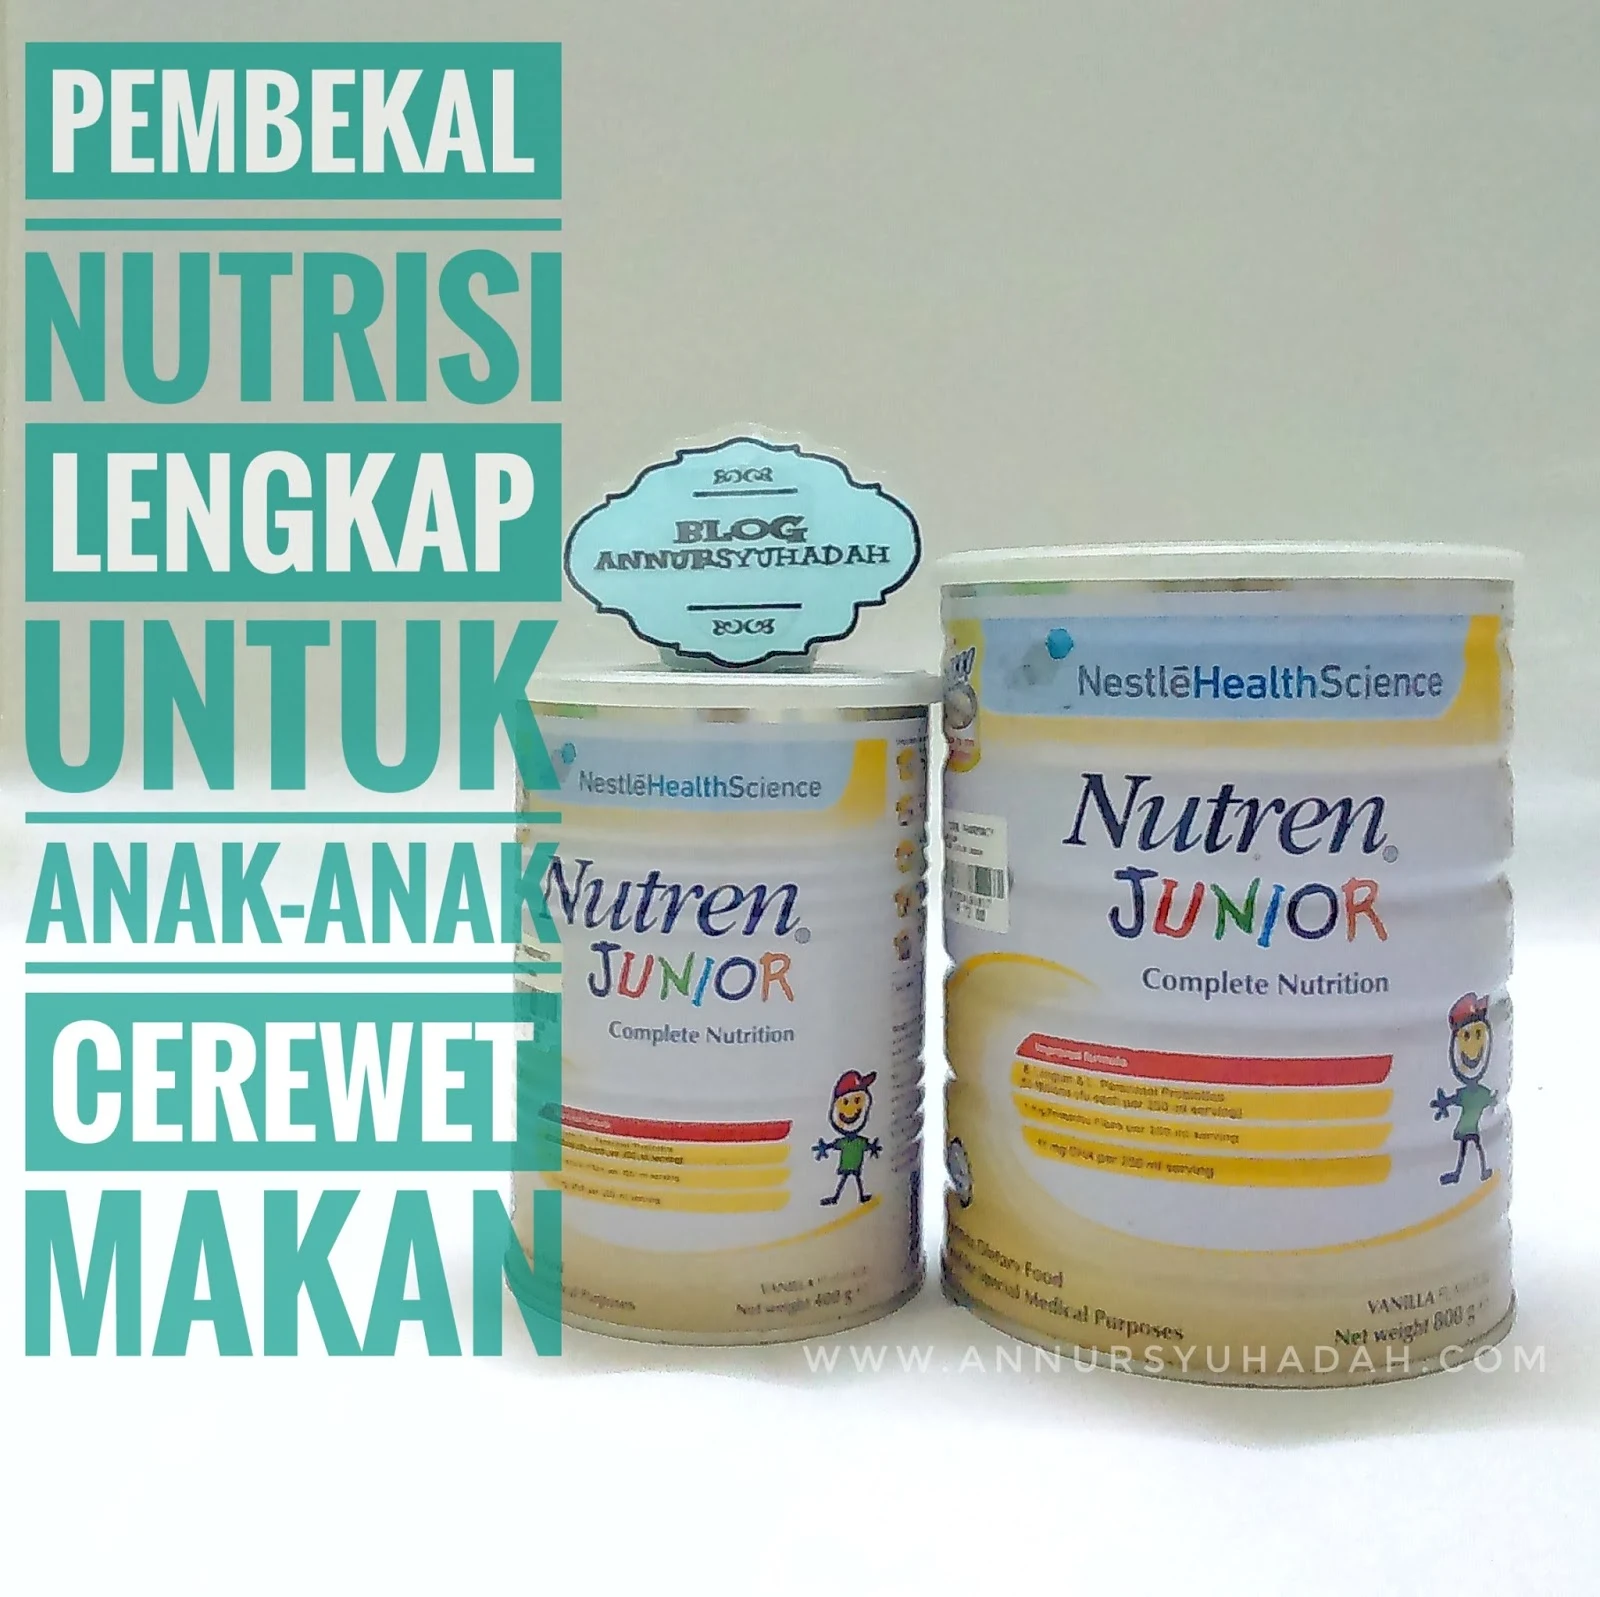 nestle-nutren-junior-review-and-price